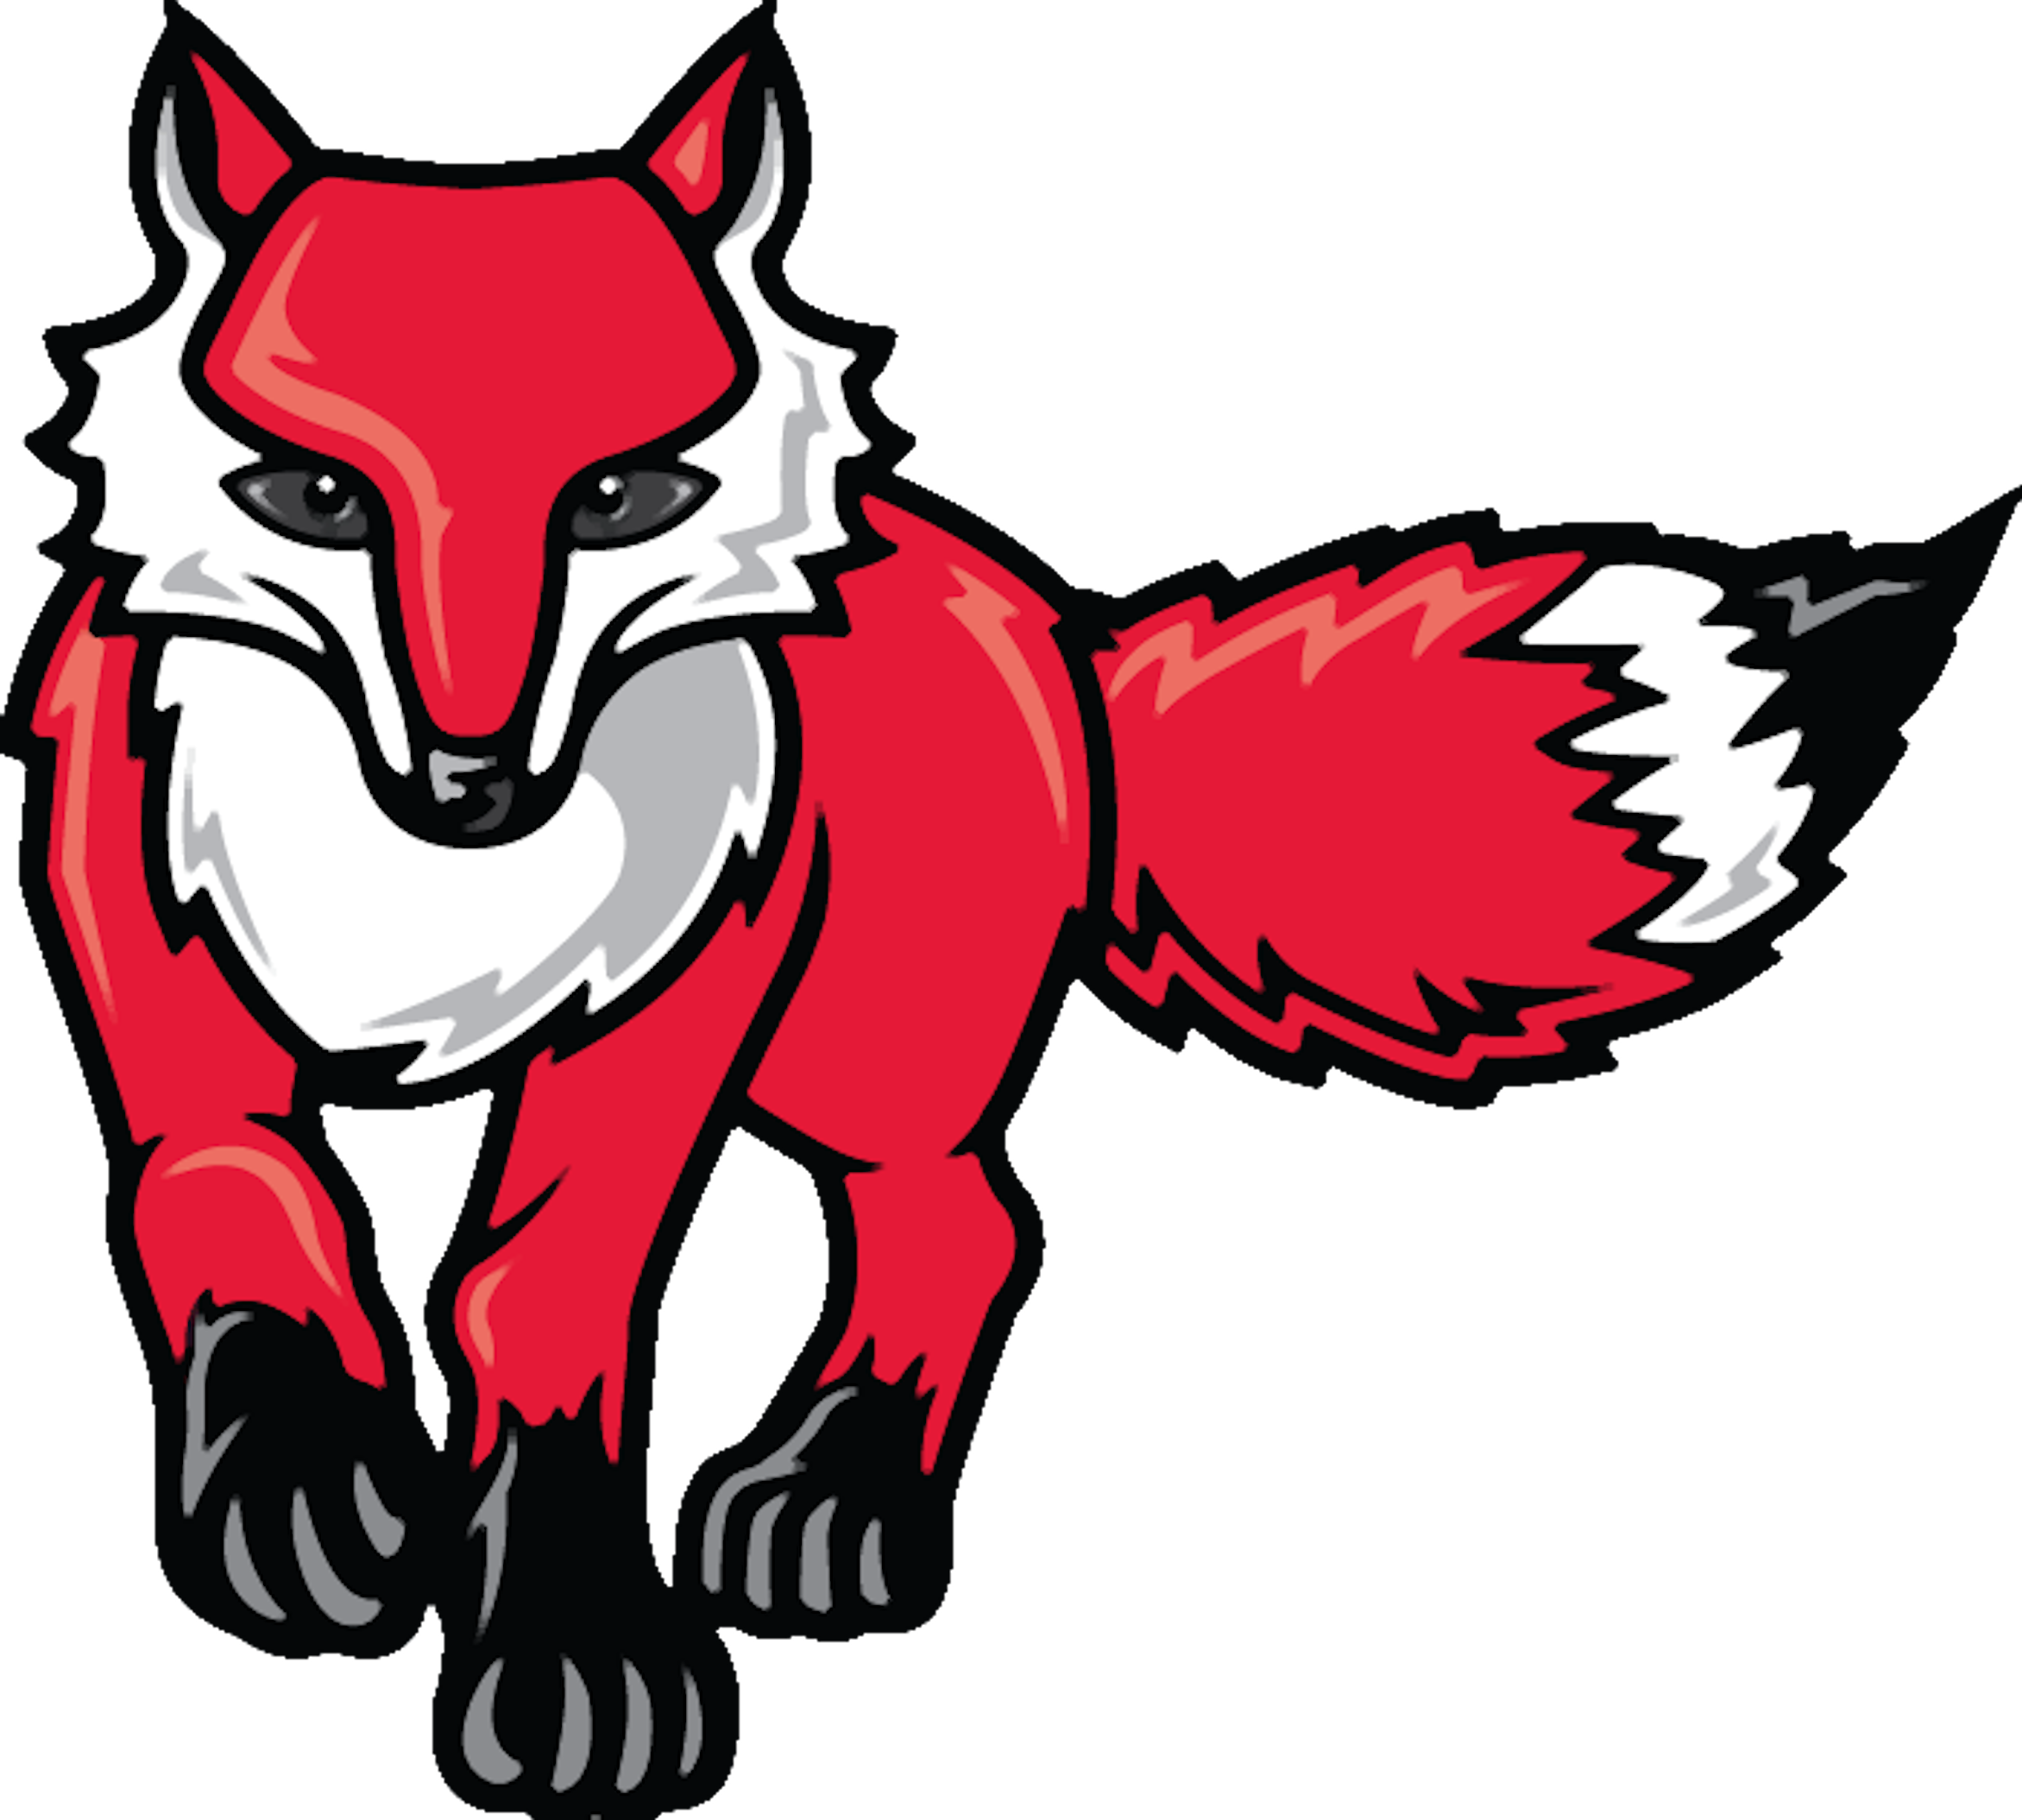 red fox - standing red fox is